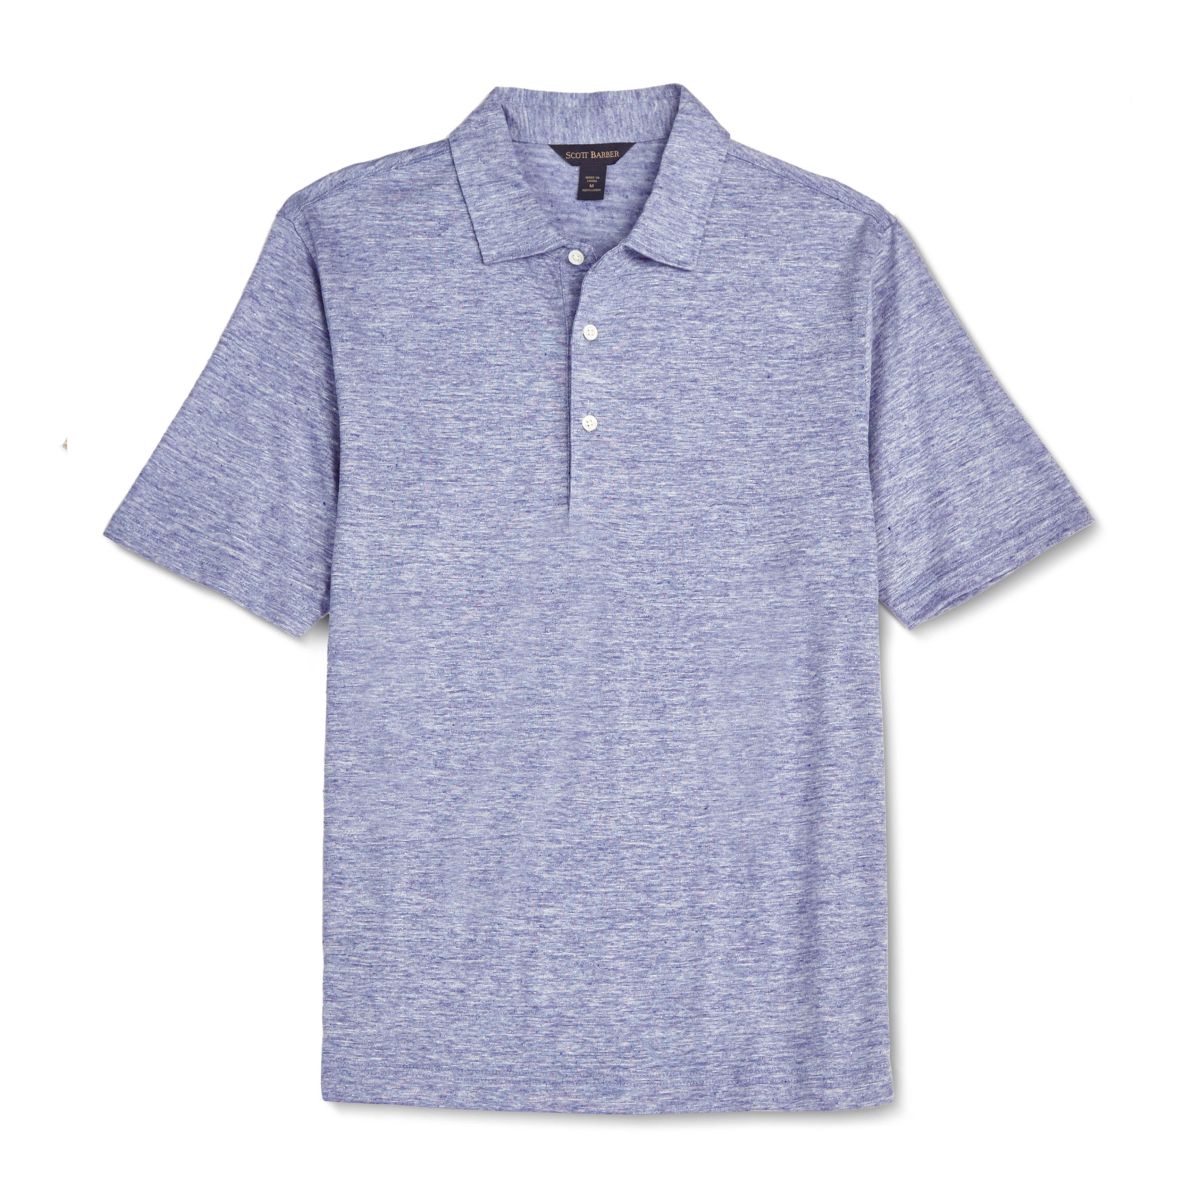 Linen Mélange Three-Button Polo in Sky Blue by Scott Barber